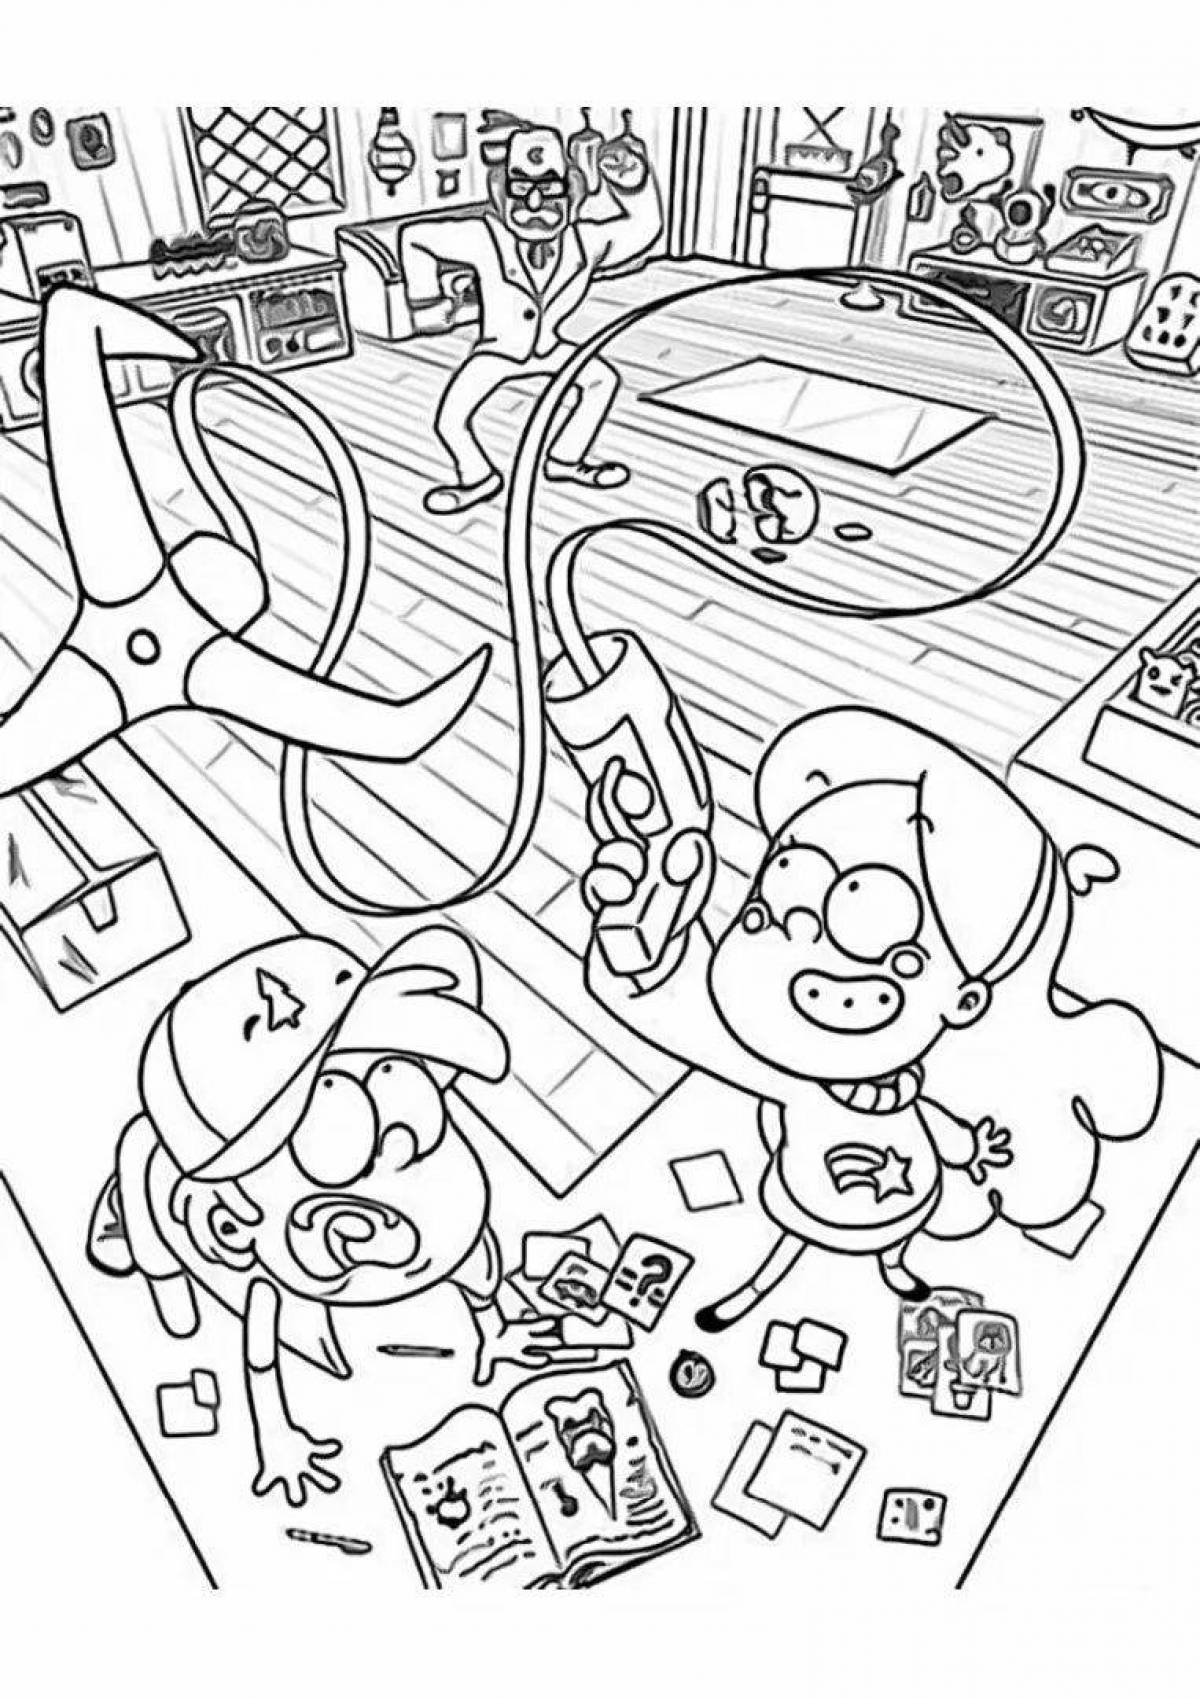 Colorful gravity falls coloring pages for kids